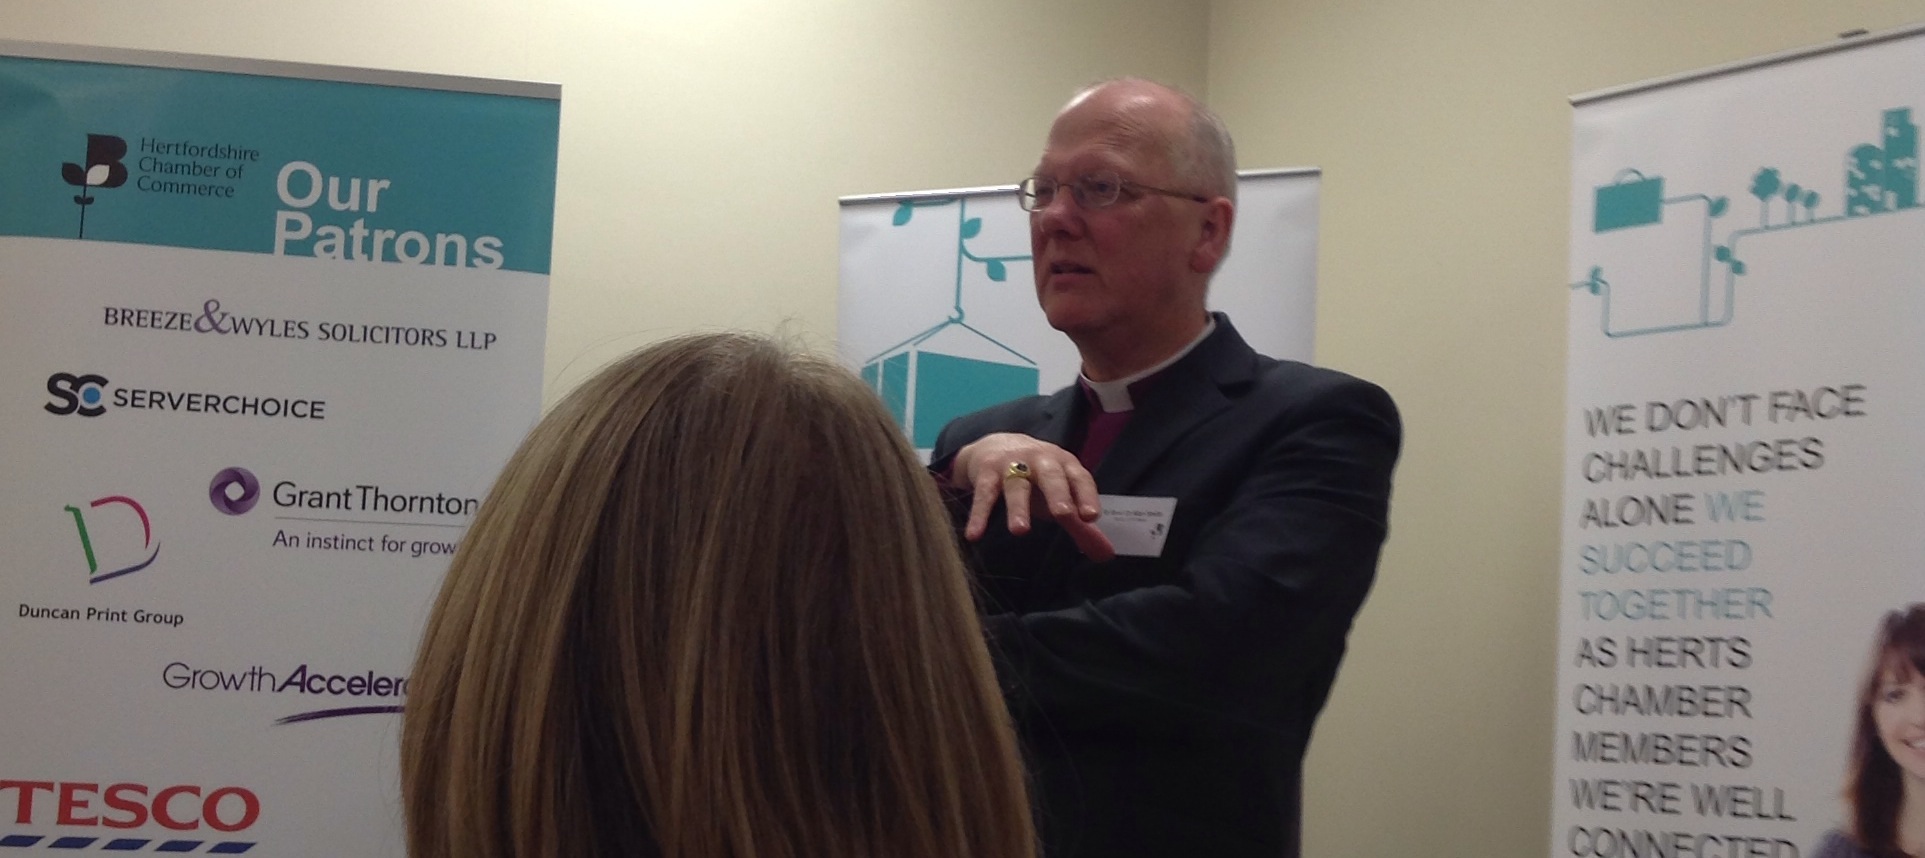 Rt Revd Dr Alan Smith at Herts Chamber of Commerce